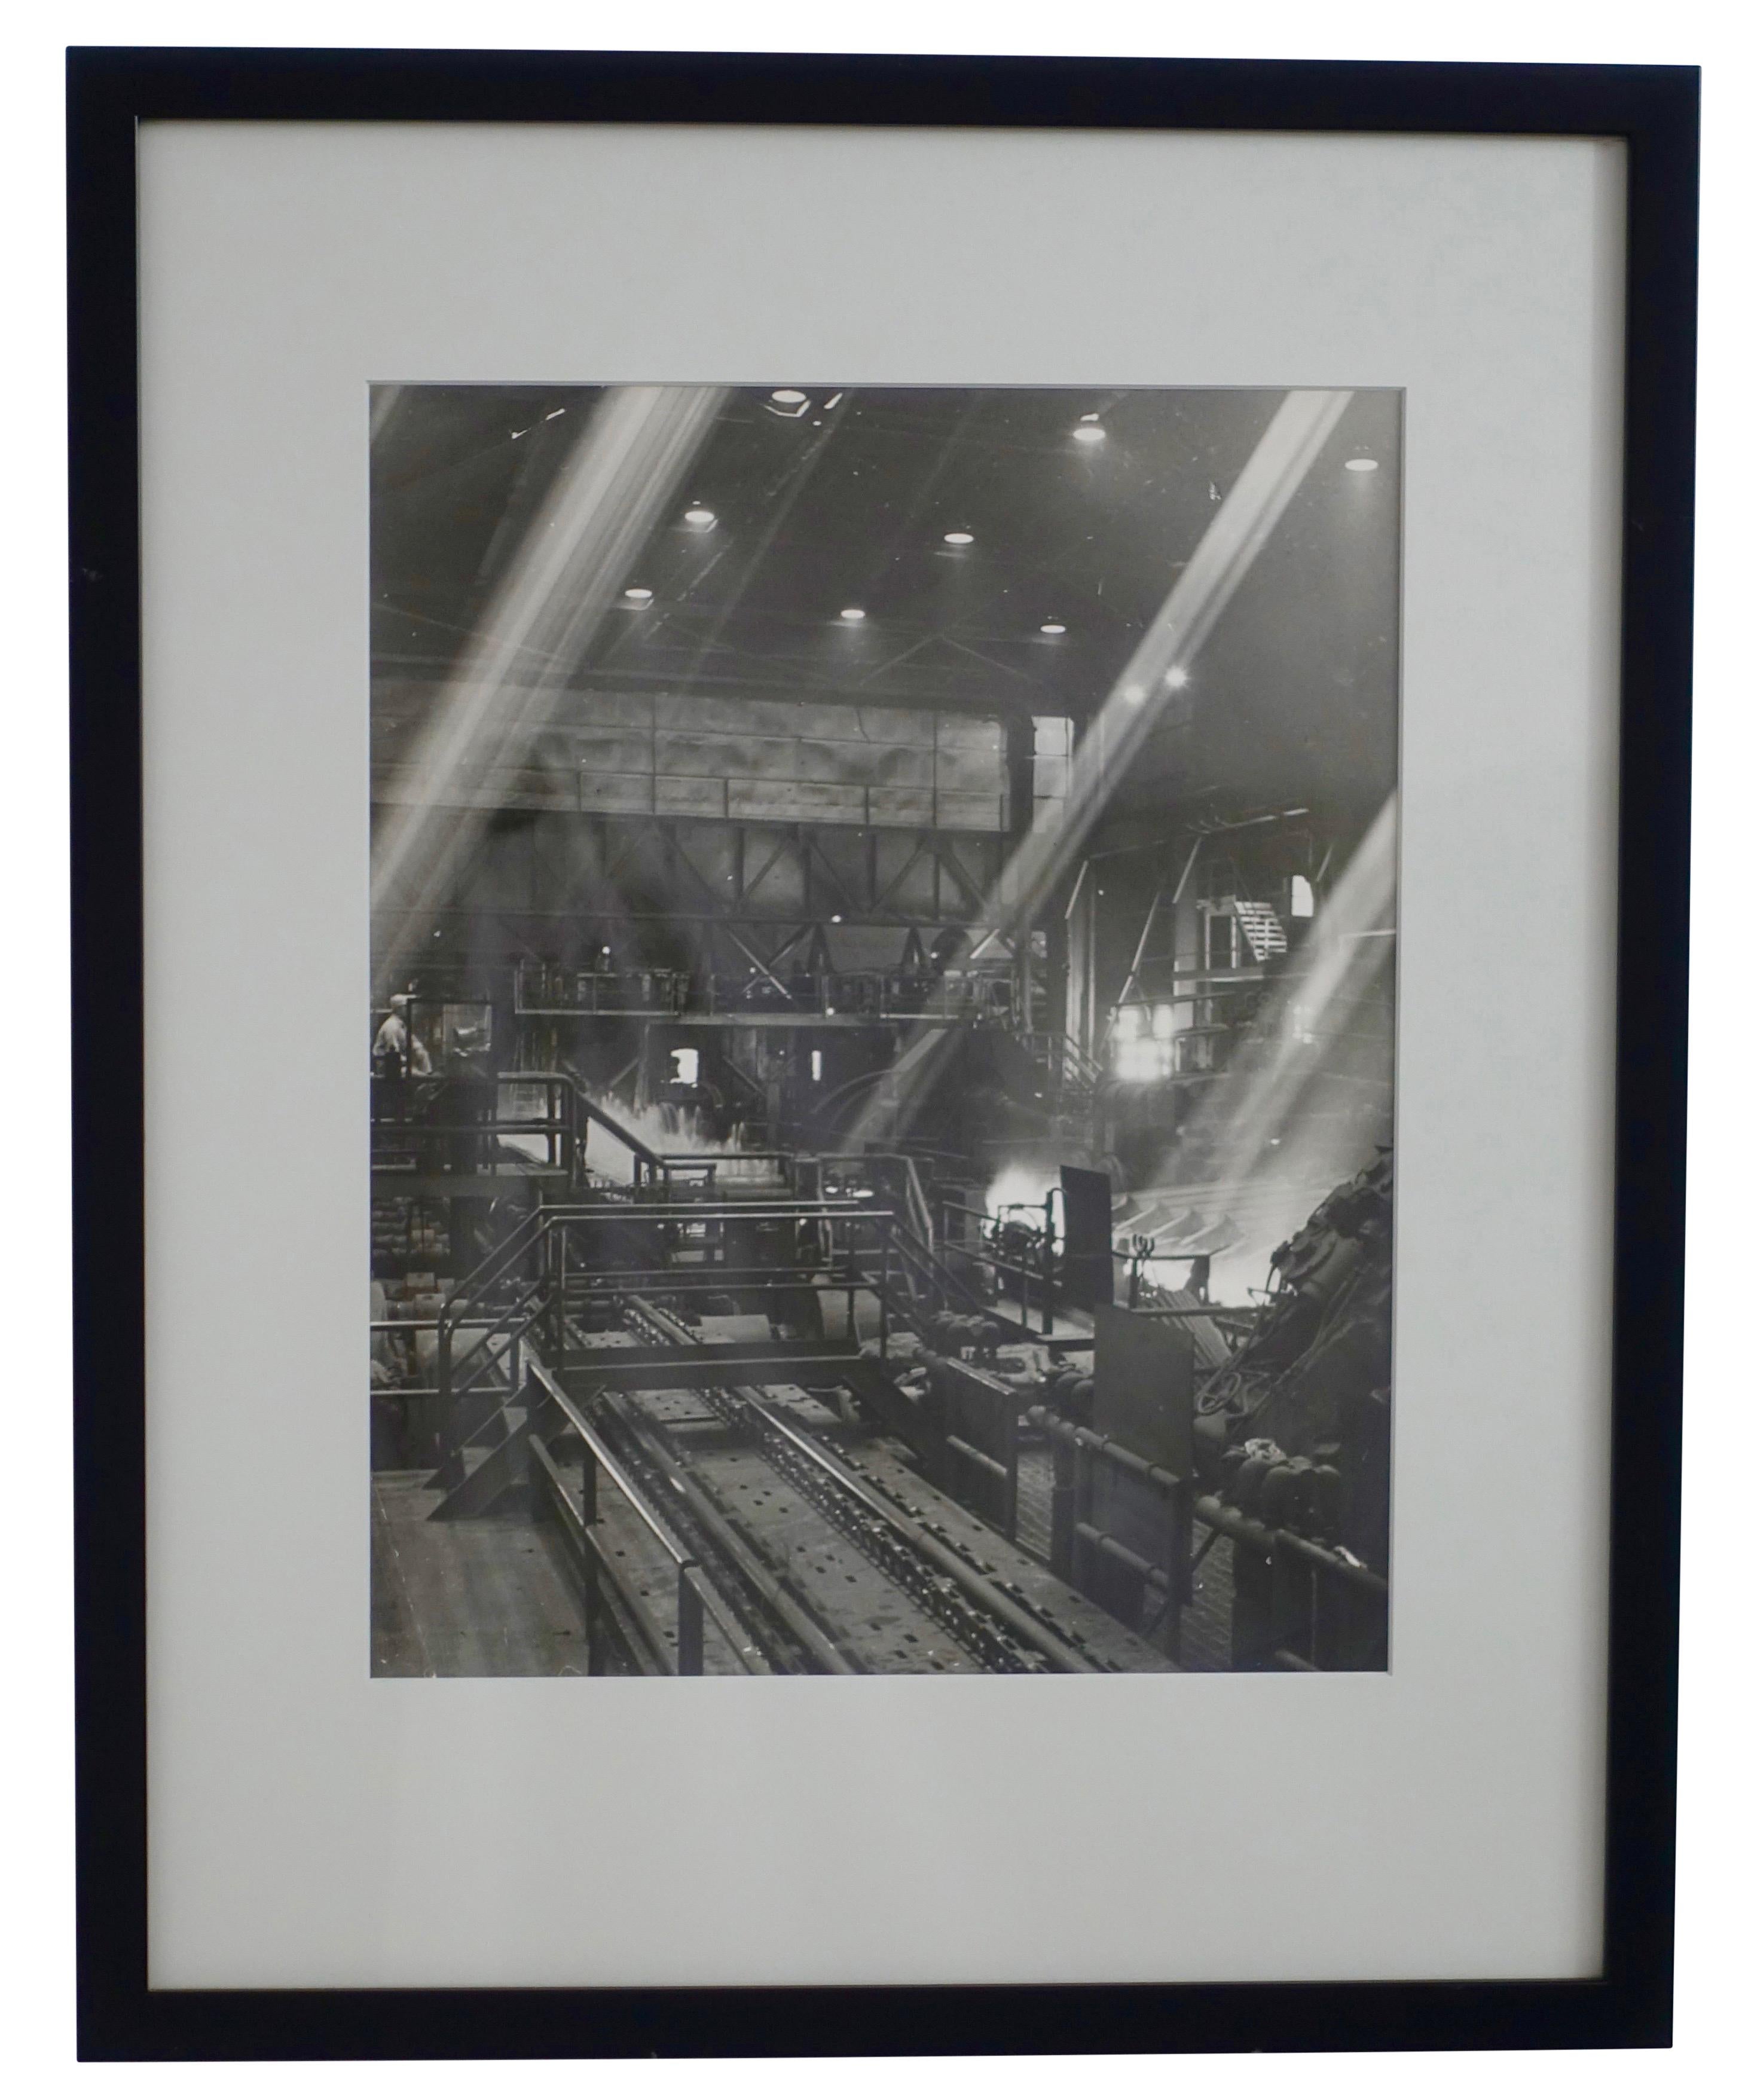 One of a kind, never published, black and white photograph of an Industrial steel mill scene, unsigned. Professionally matted and framed, American, early to mid-20th century.